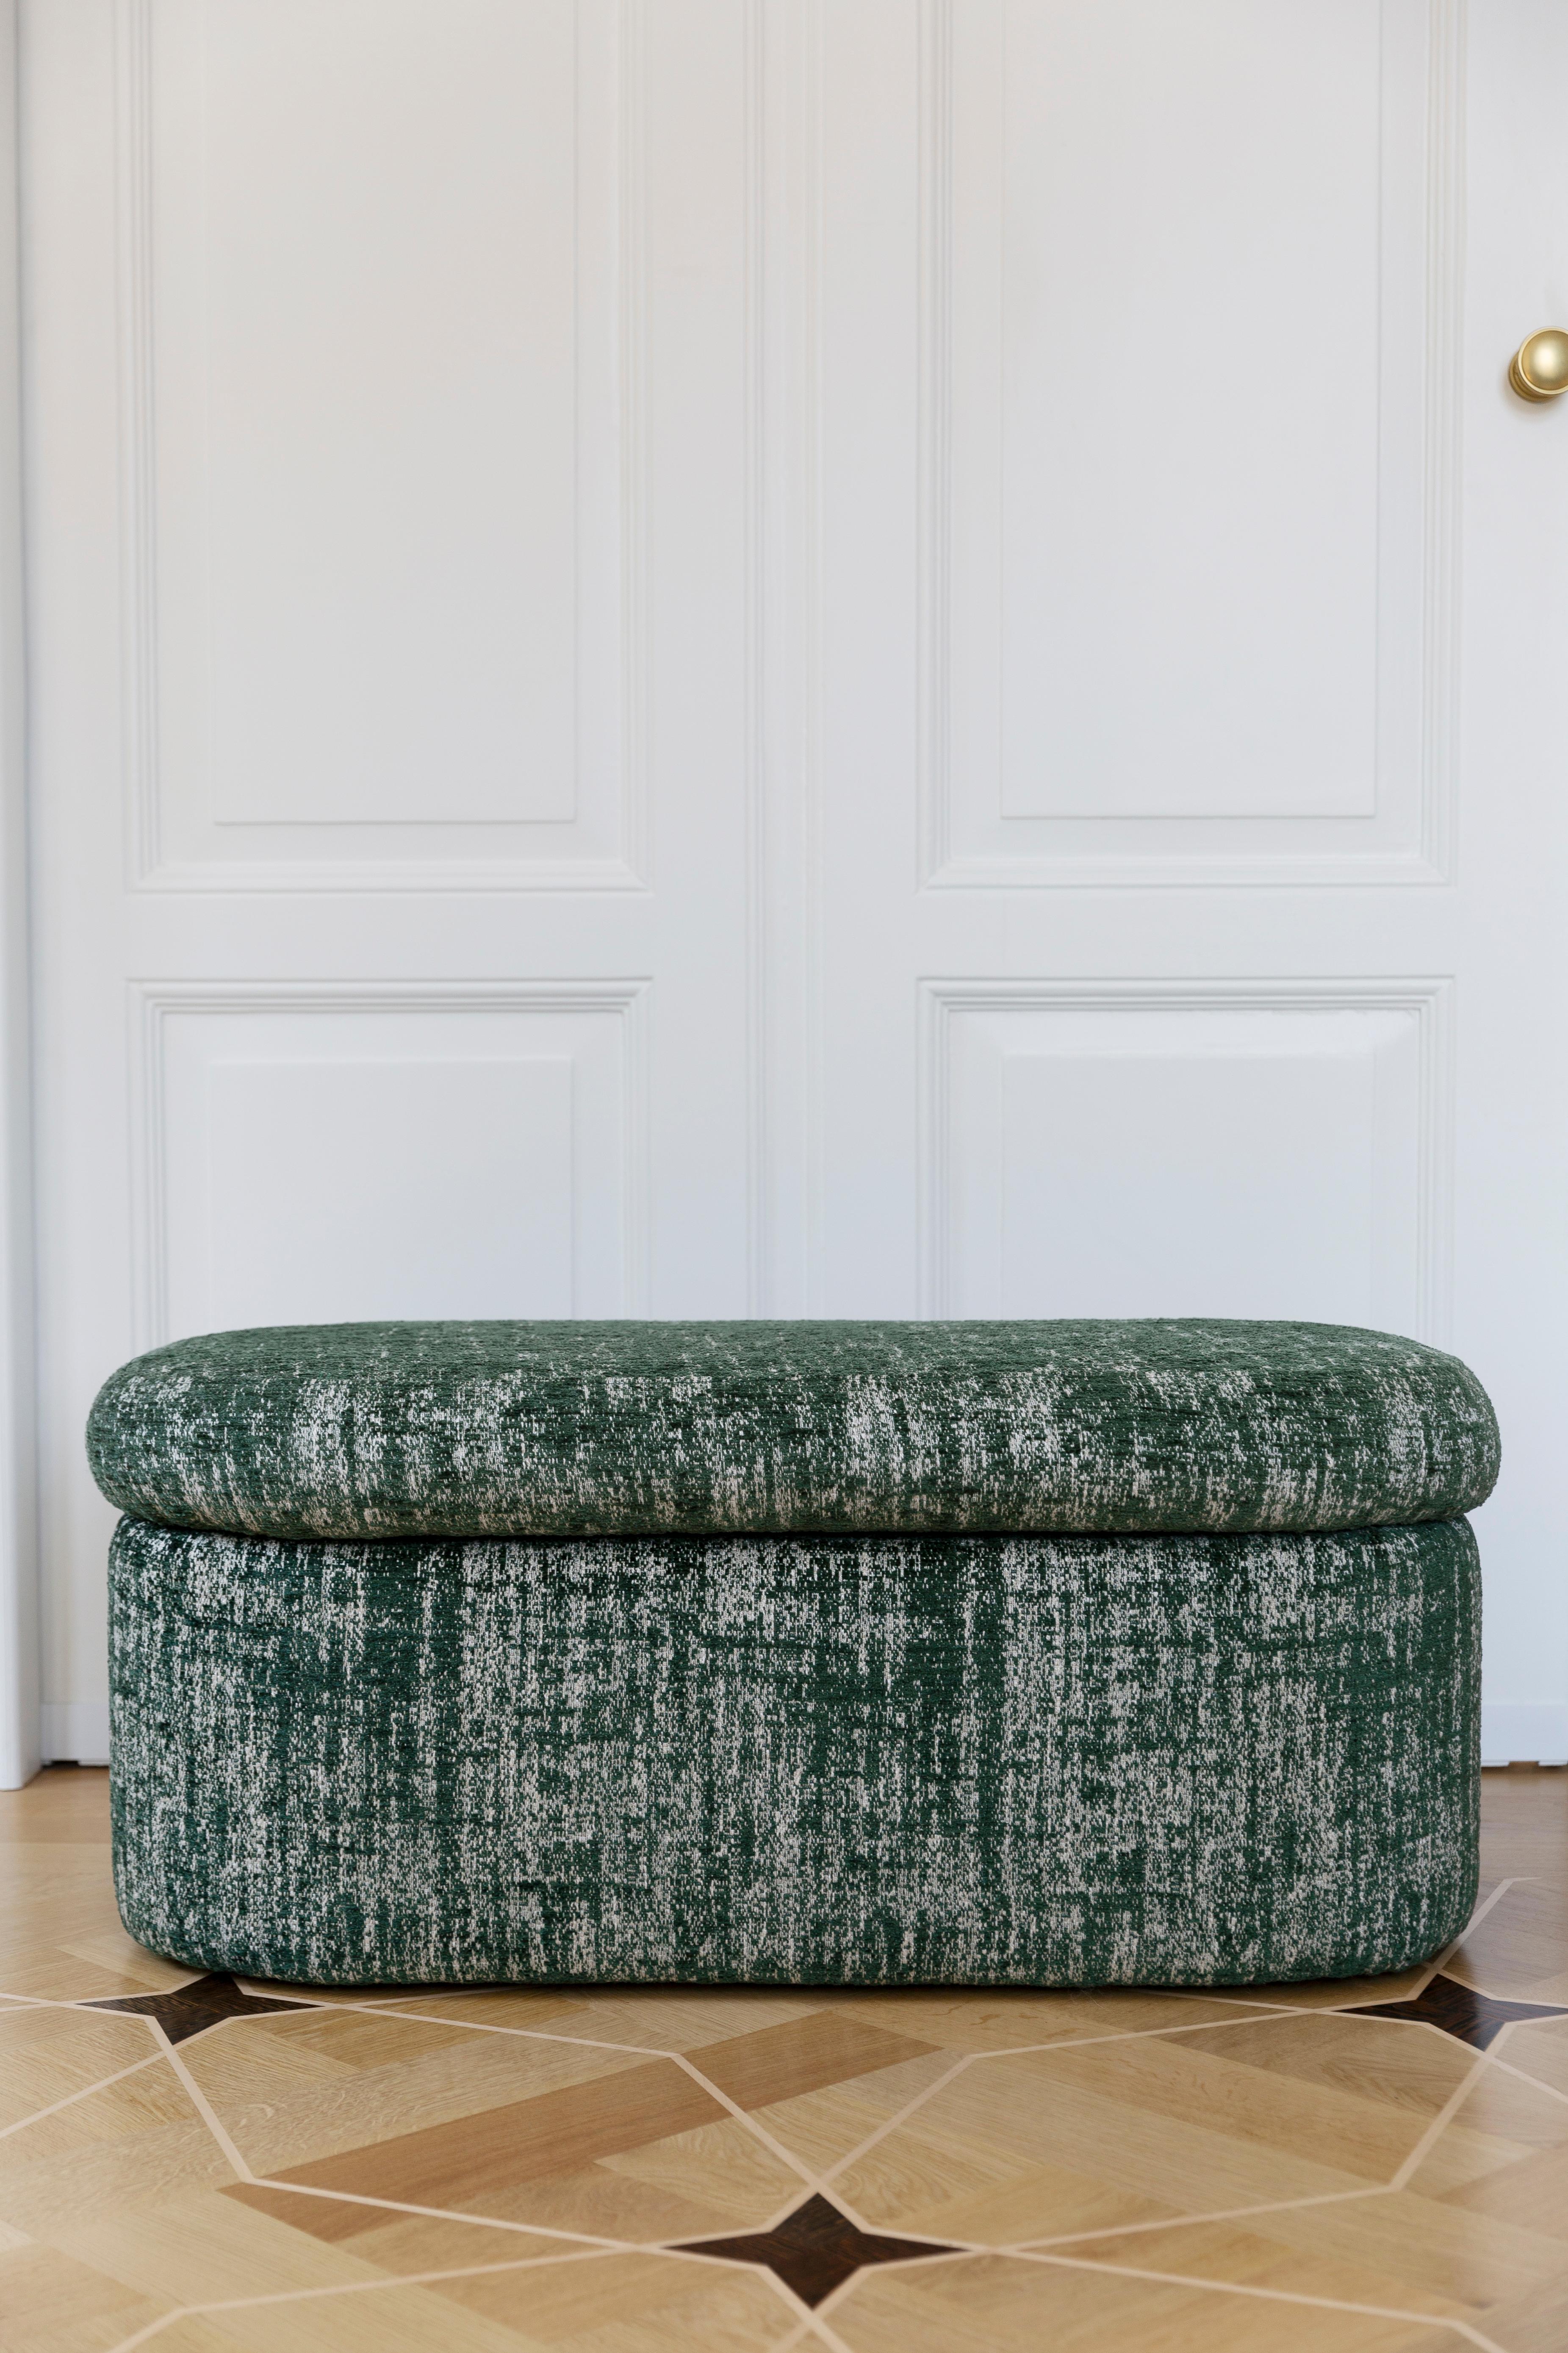 Contemporary Pouffe inspired of 1960s style. The pouffe consist of an upholstered part, a seat and box under the seat, characteristic of the 1960s style.

Bench was designed by Vintola Studio, a Polish brand created by Ola Szewczul, designer of